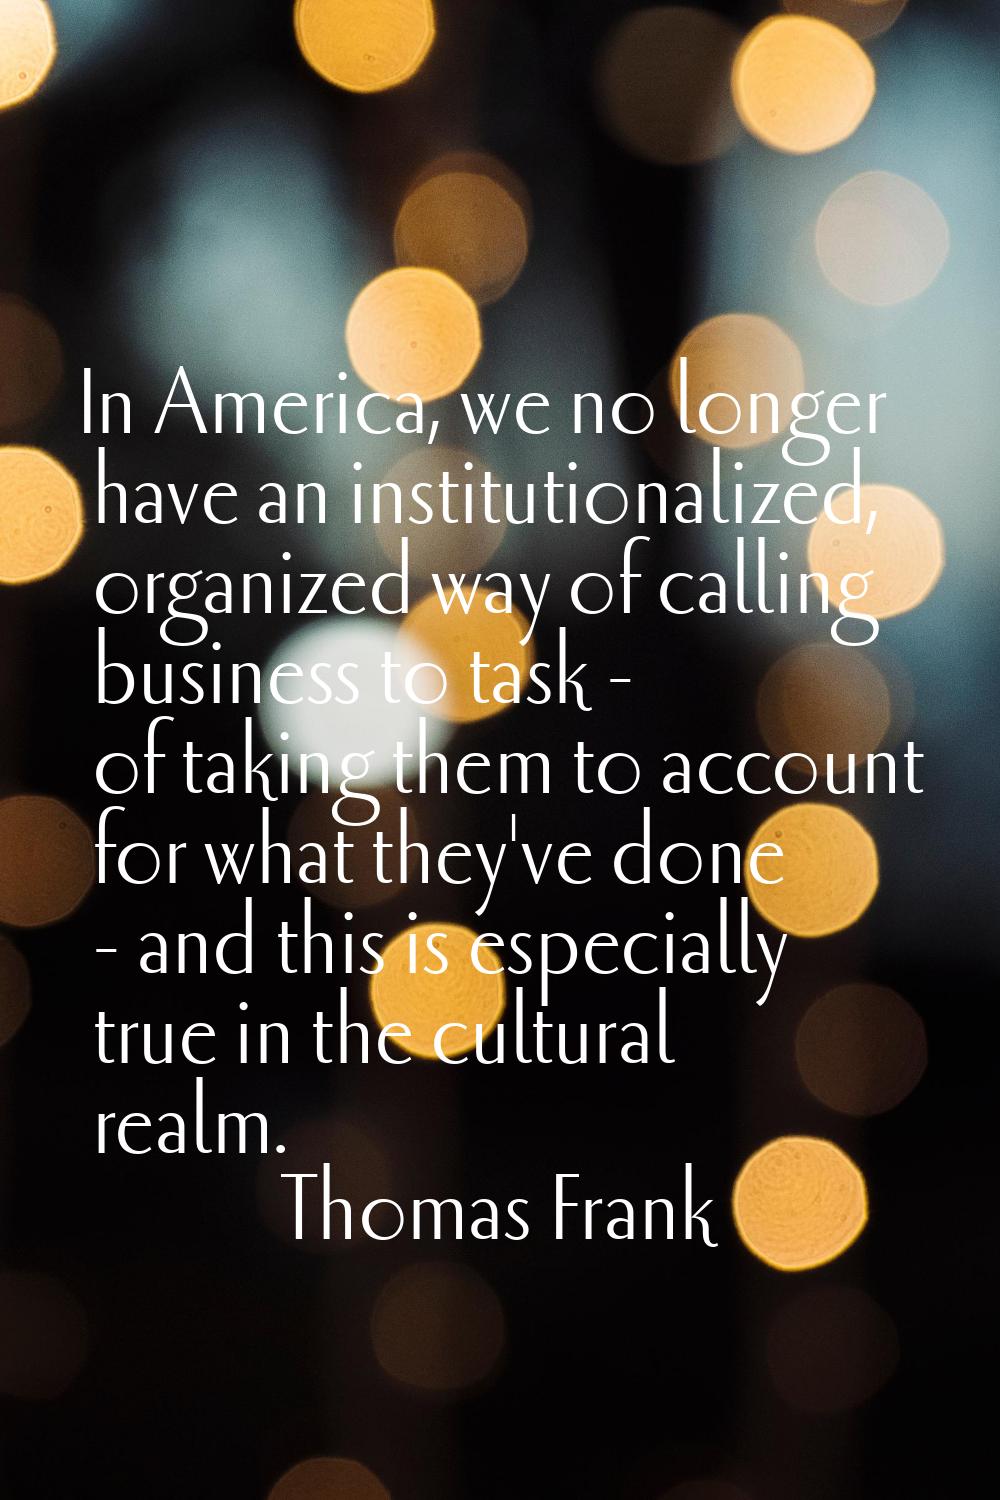 In America, we no longer have an institutionalized, organized way of calling business to task - of 